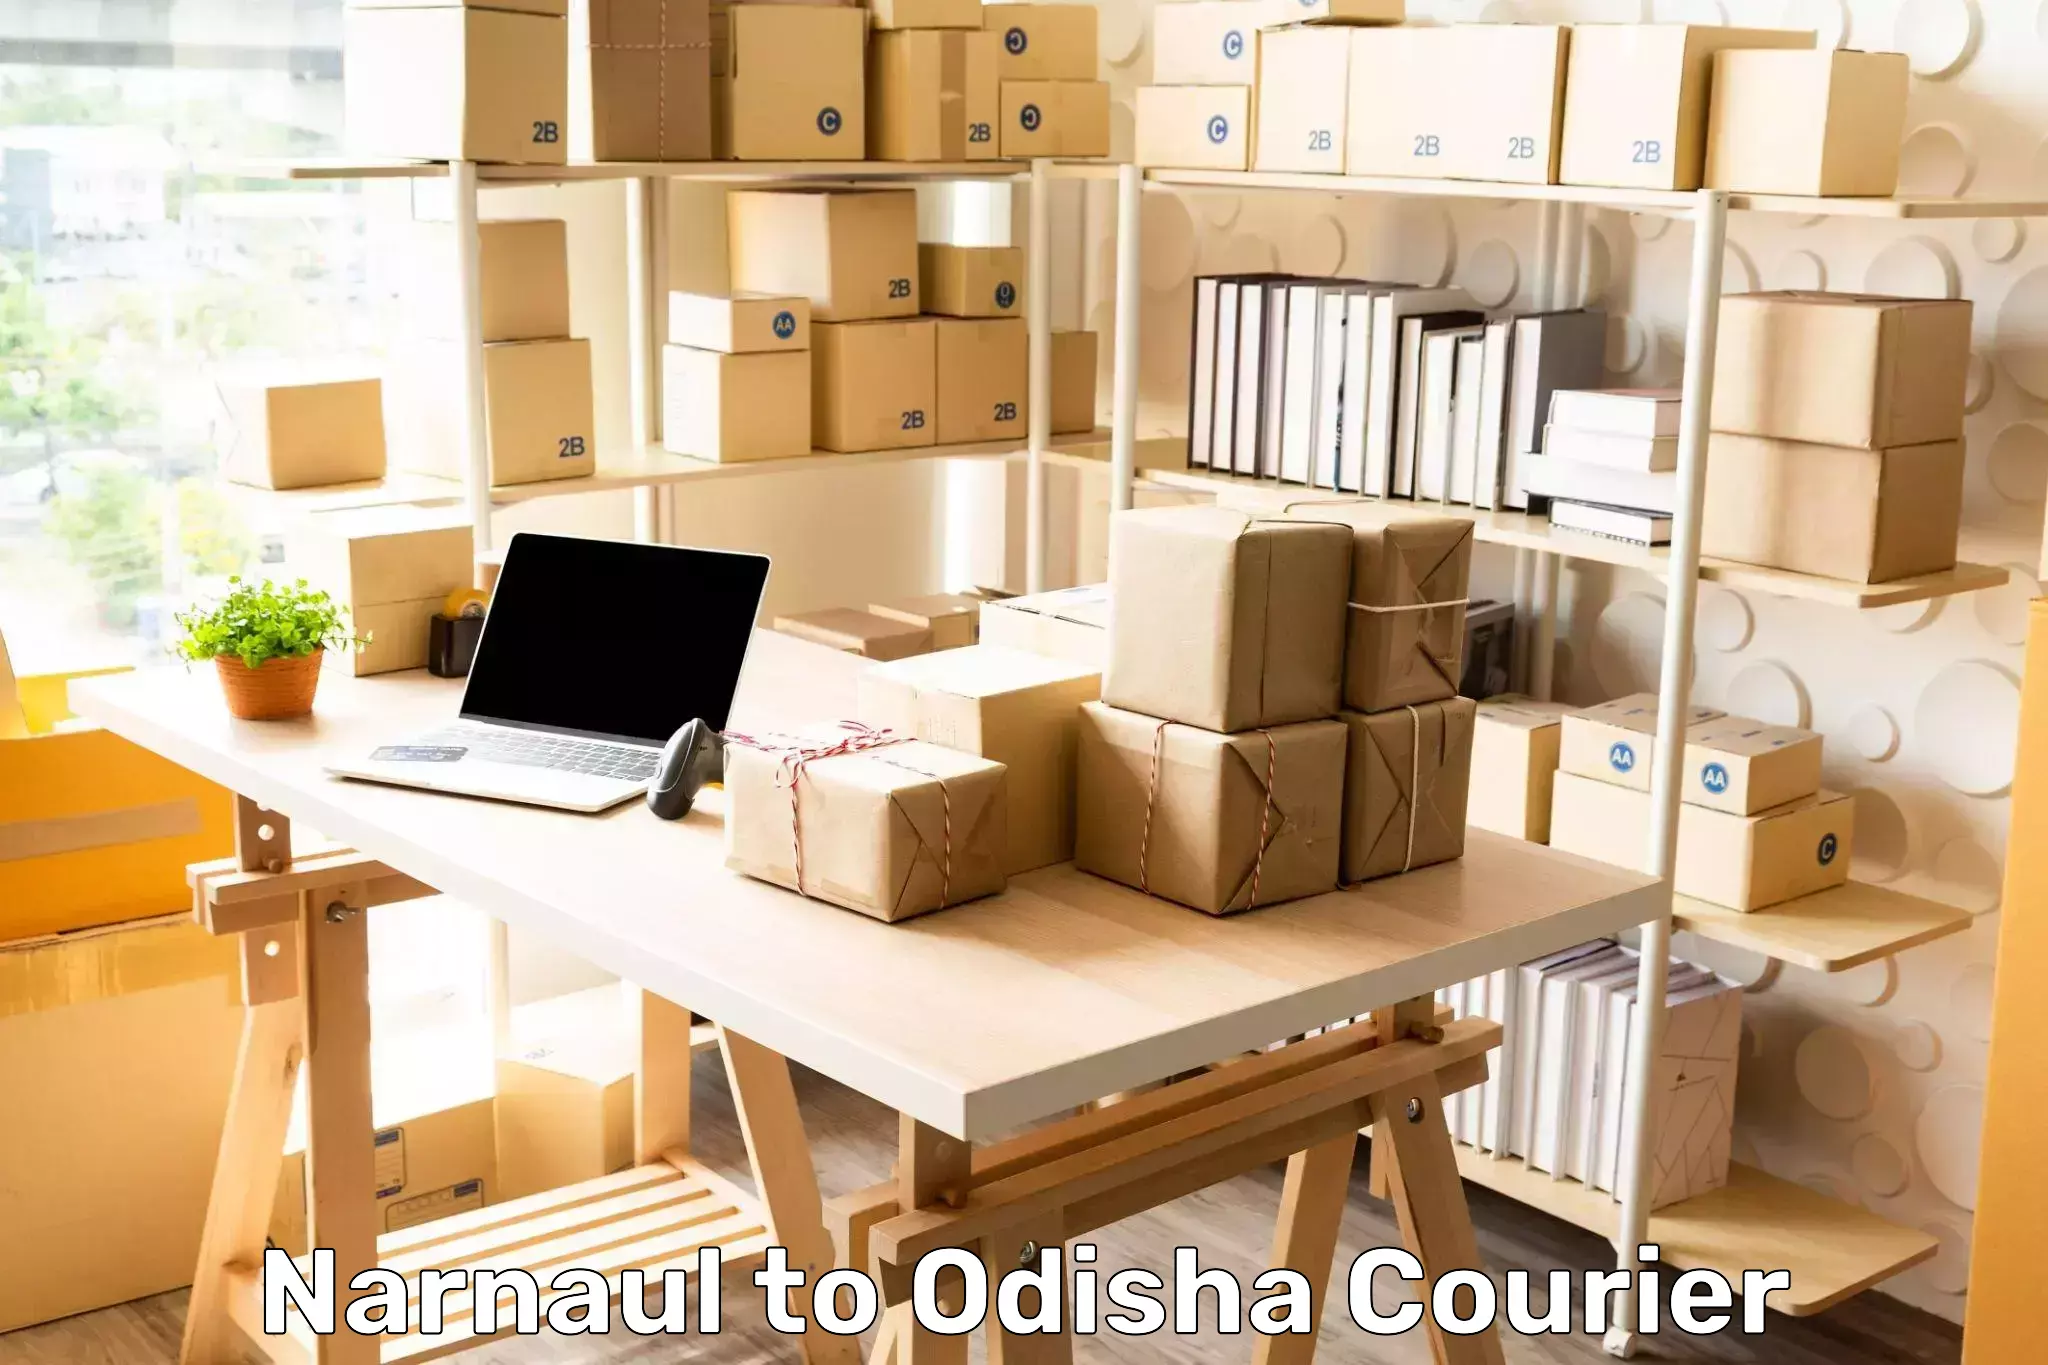 Subscription-based courier Narnaul to Chandbali